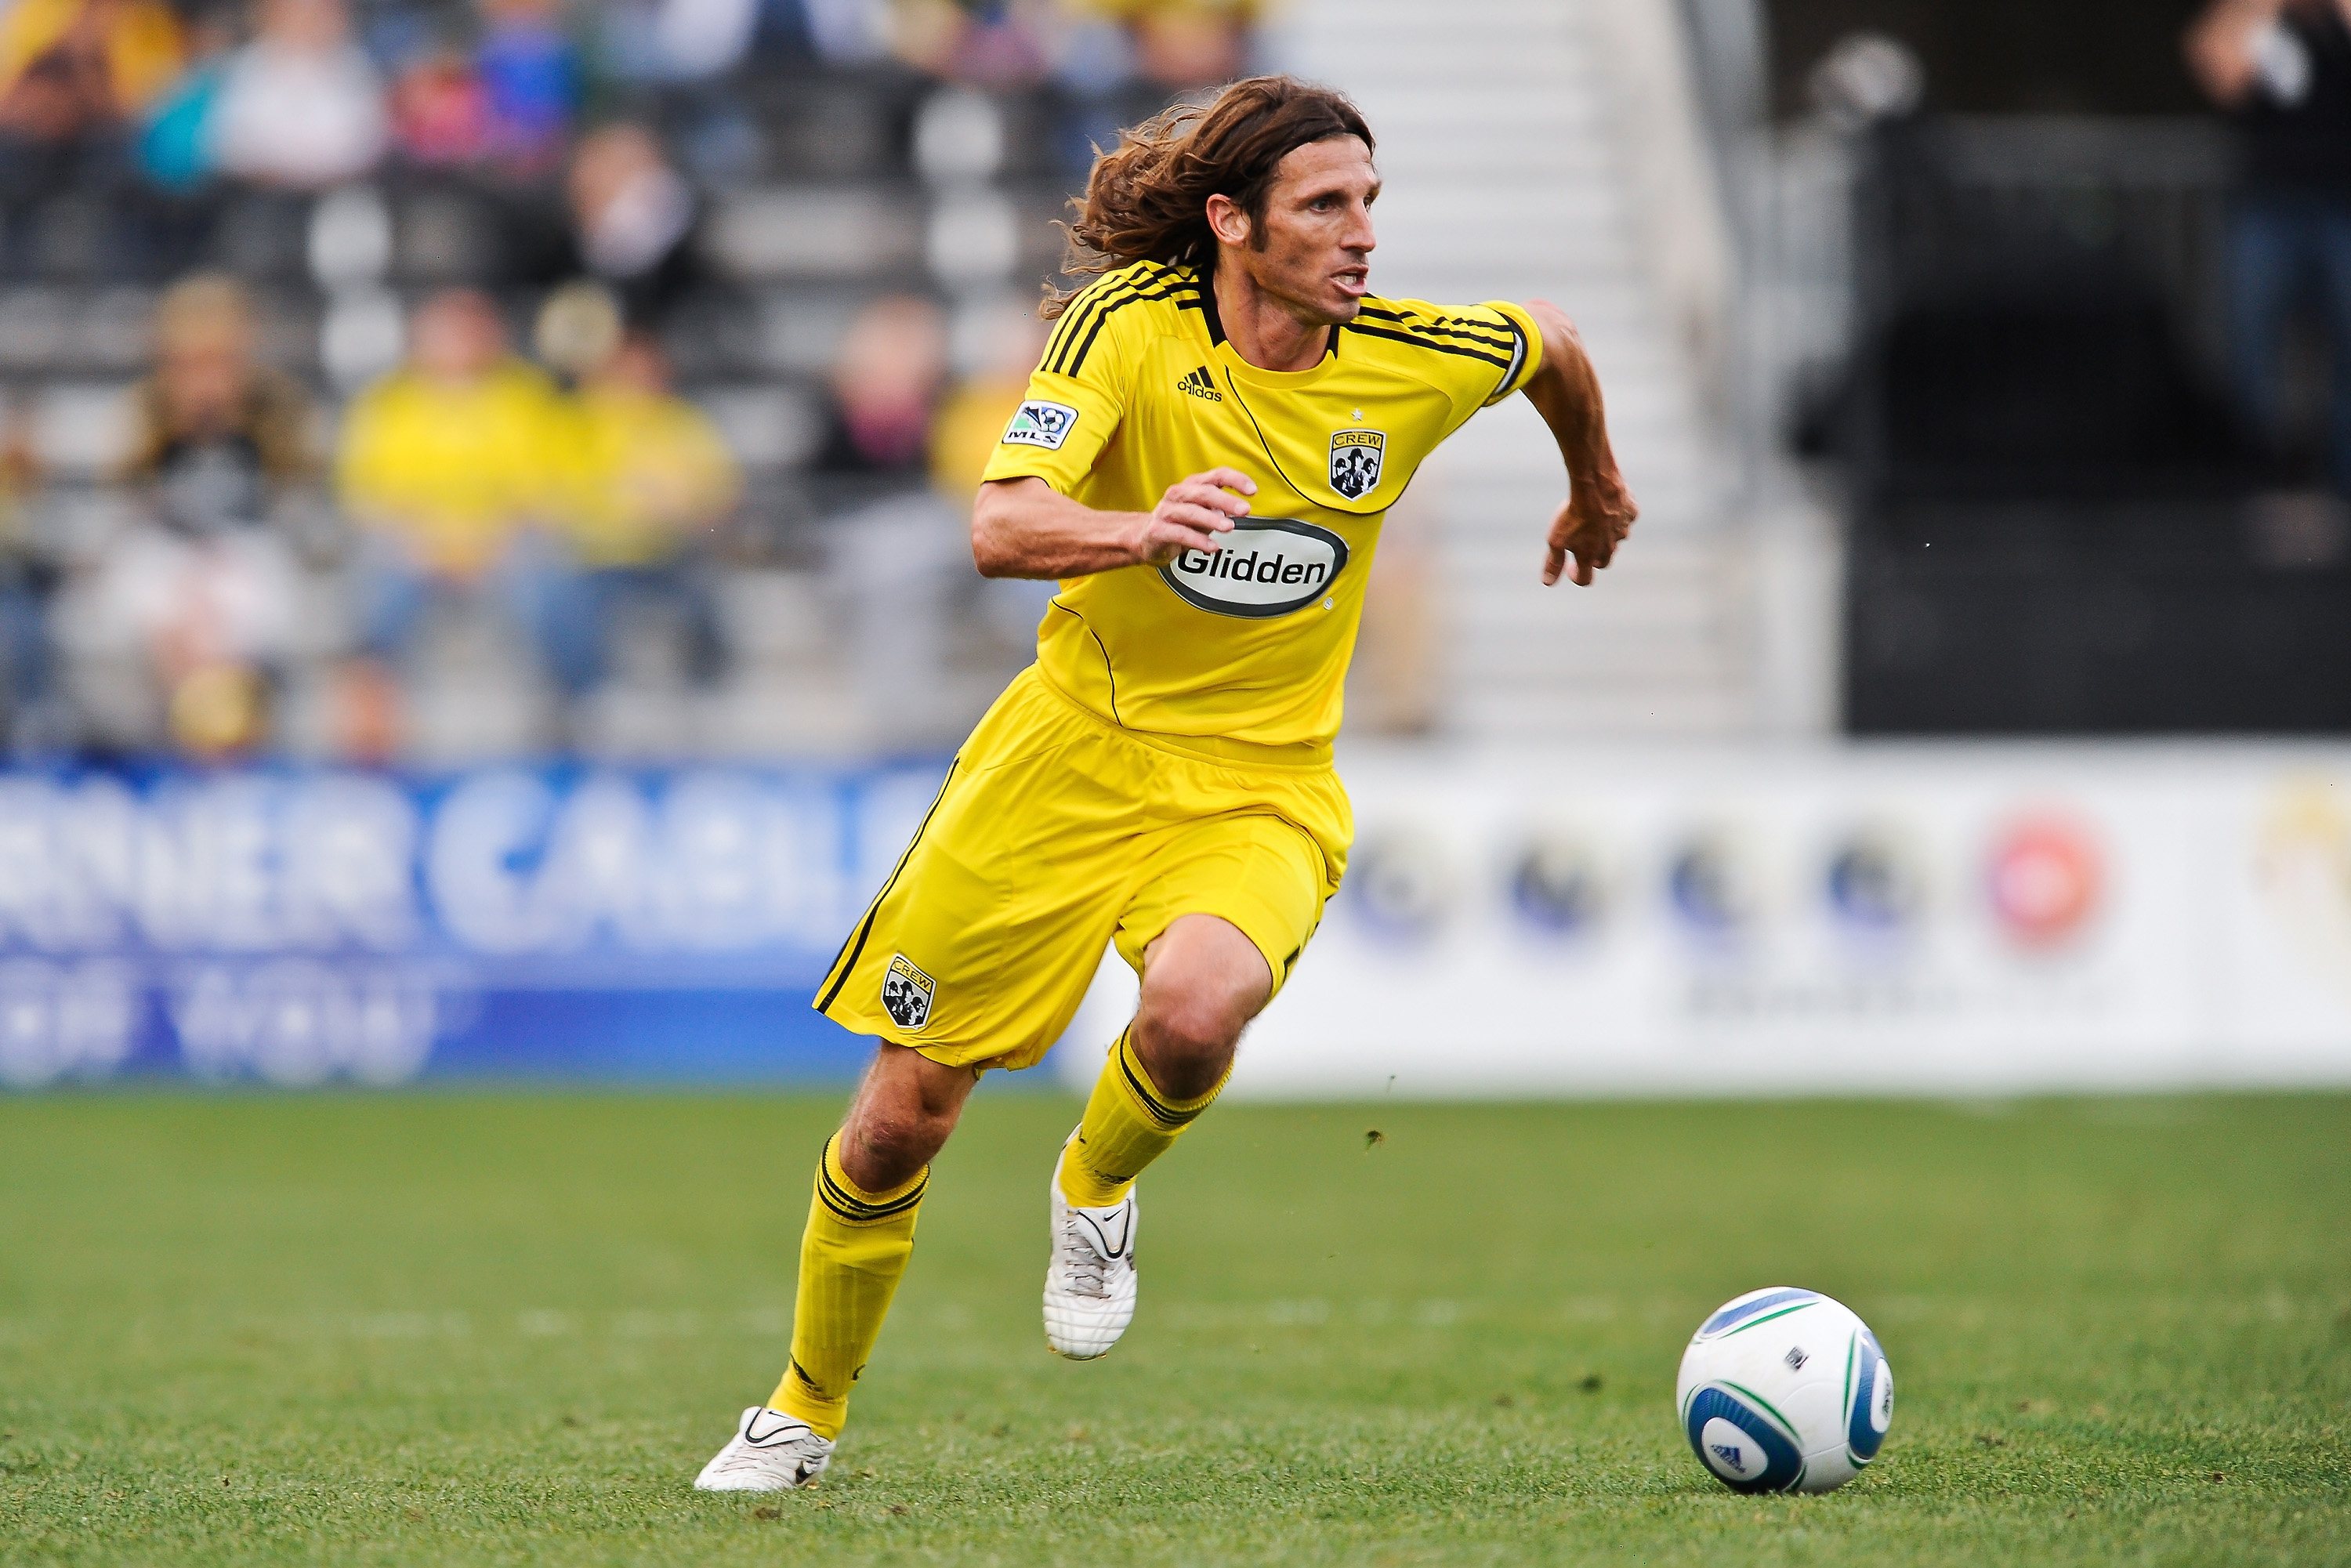 COLUMBUS, OH - OCTOBER 24:  Frankie Hejduk #2  of the Columbus Crew controls the ball against the Philadelphia Union on October 24, 2010 at Crew Stadium in Columbus, Ohio.  (Photo by Jamie Sabau/Getty Images)